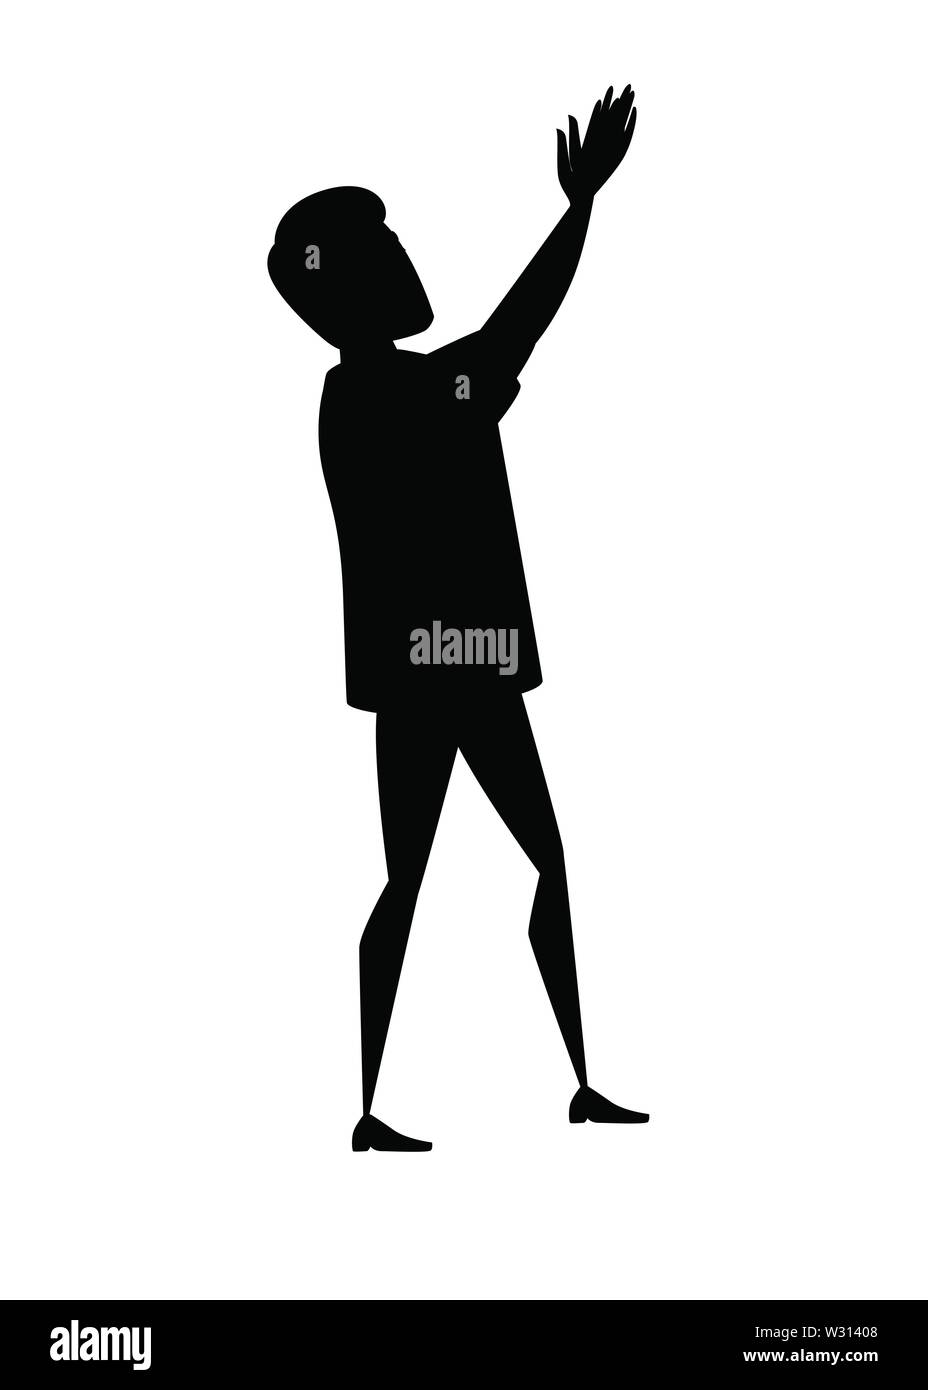 Black silhouette man wearing casual clothes with upraised hands claps cartoon character design flat vector illustration isolated on white background. Stock Vector